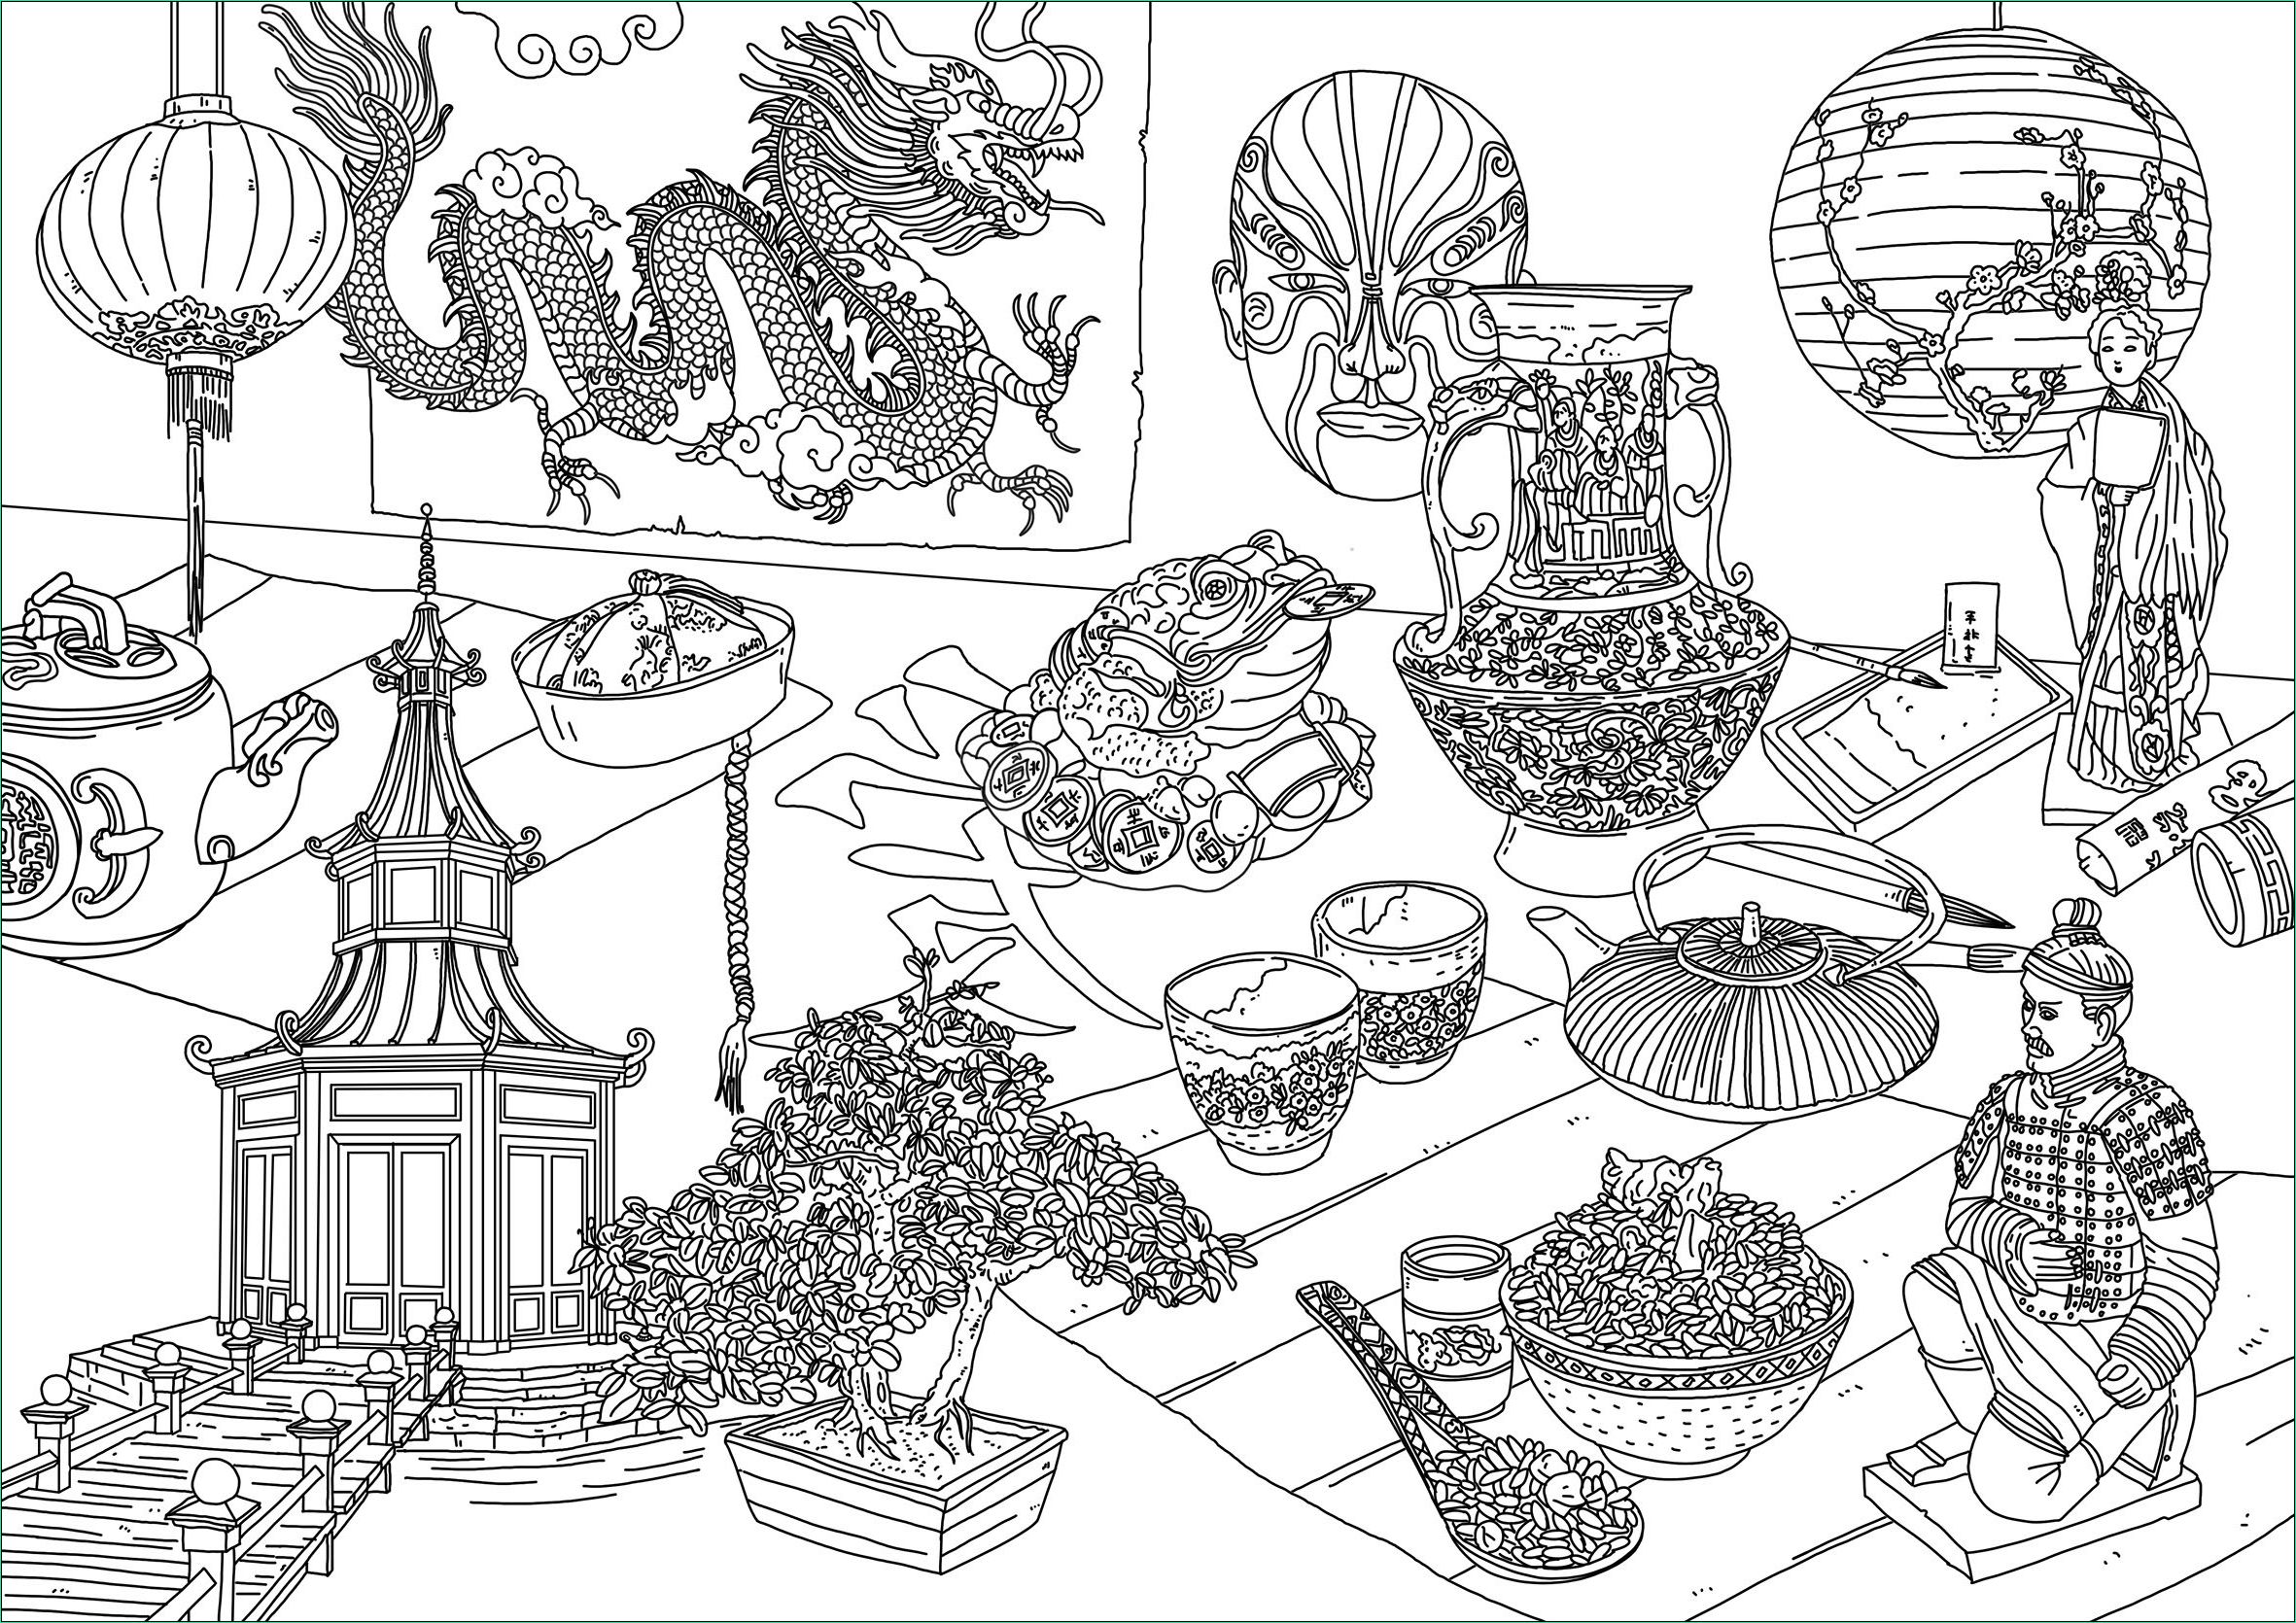 image=chine asie coloriage frederic brogard chine 1